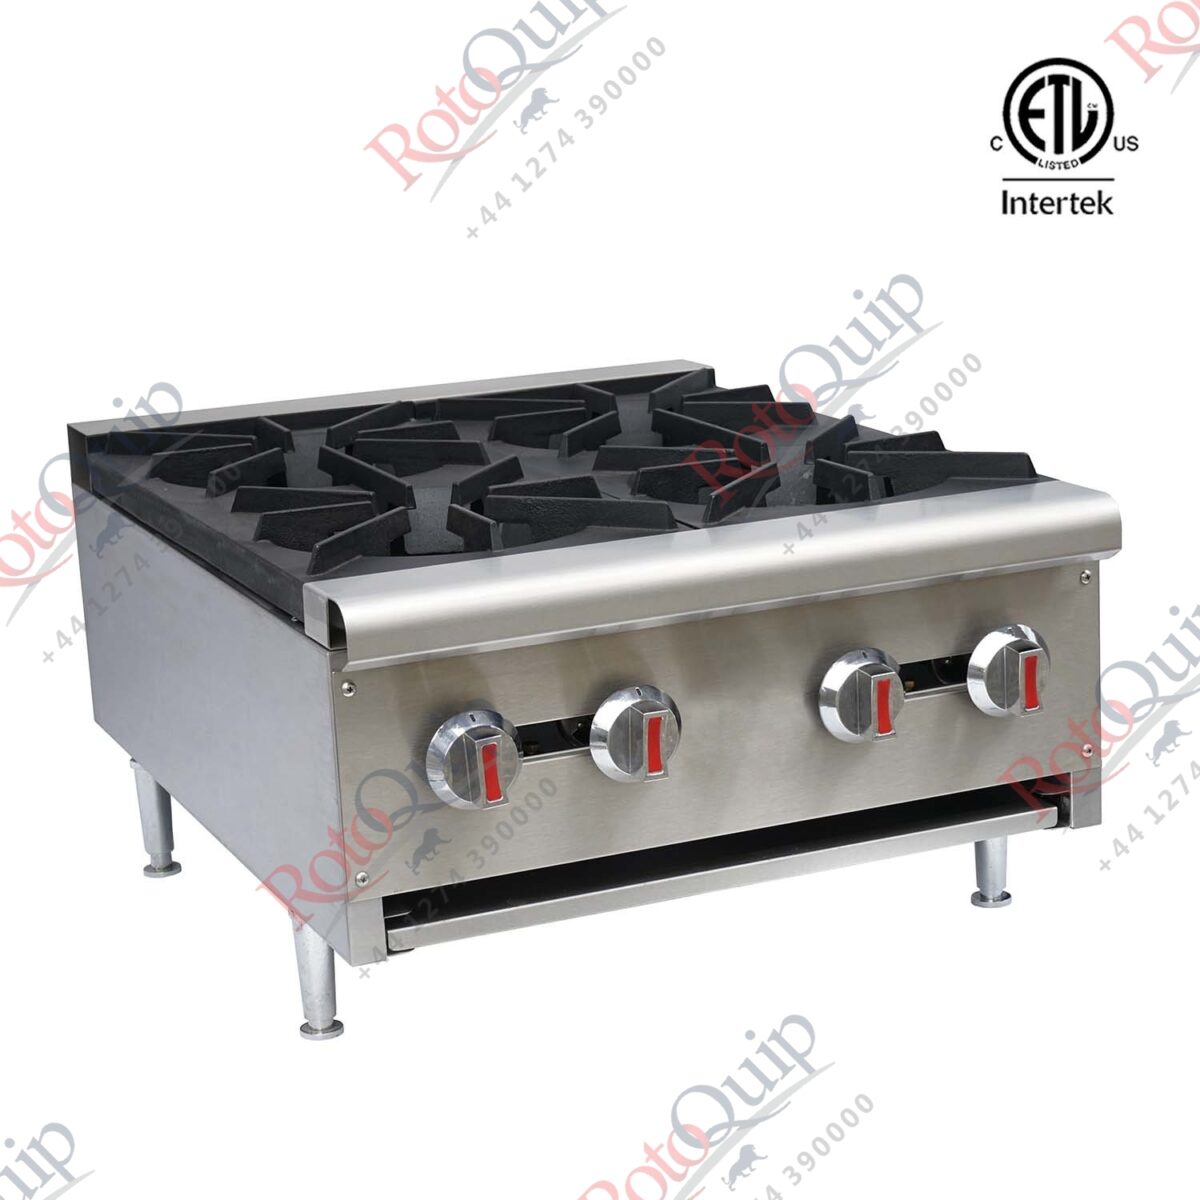 RGHP-4W – 4 Burner Table Top Gas Hotplate Cooker